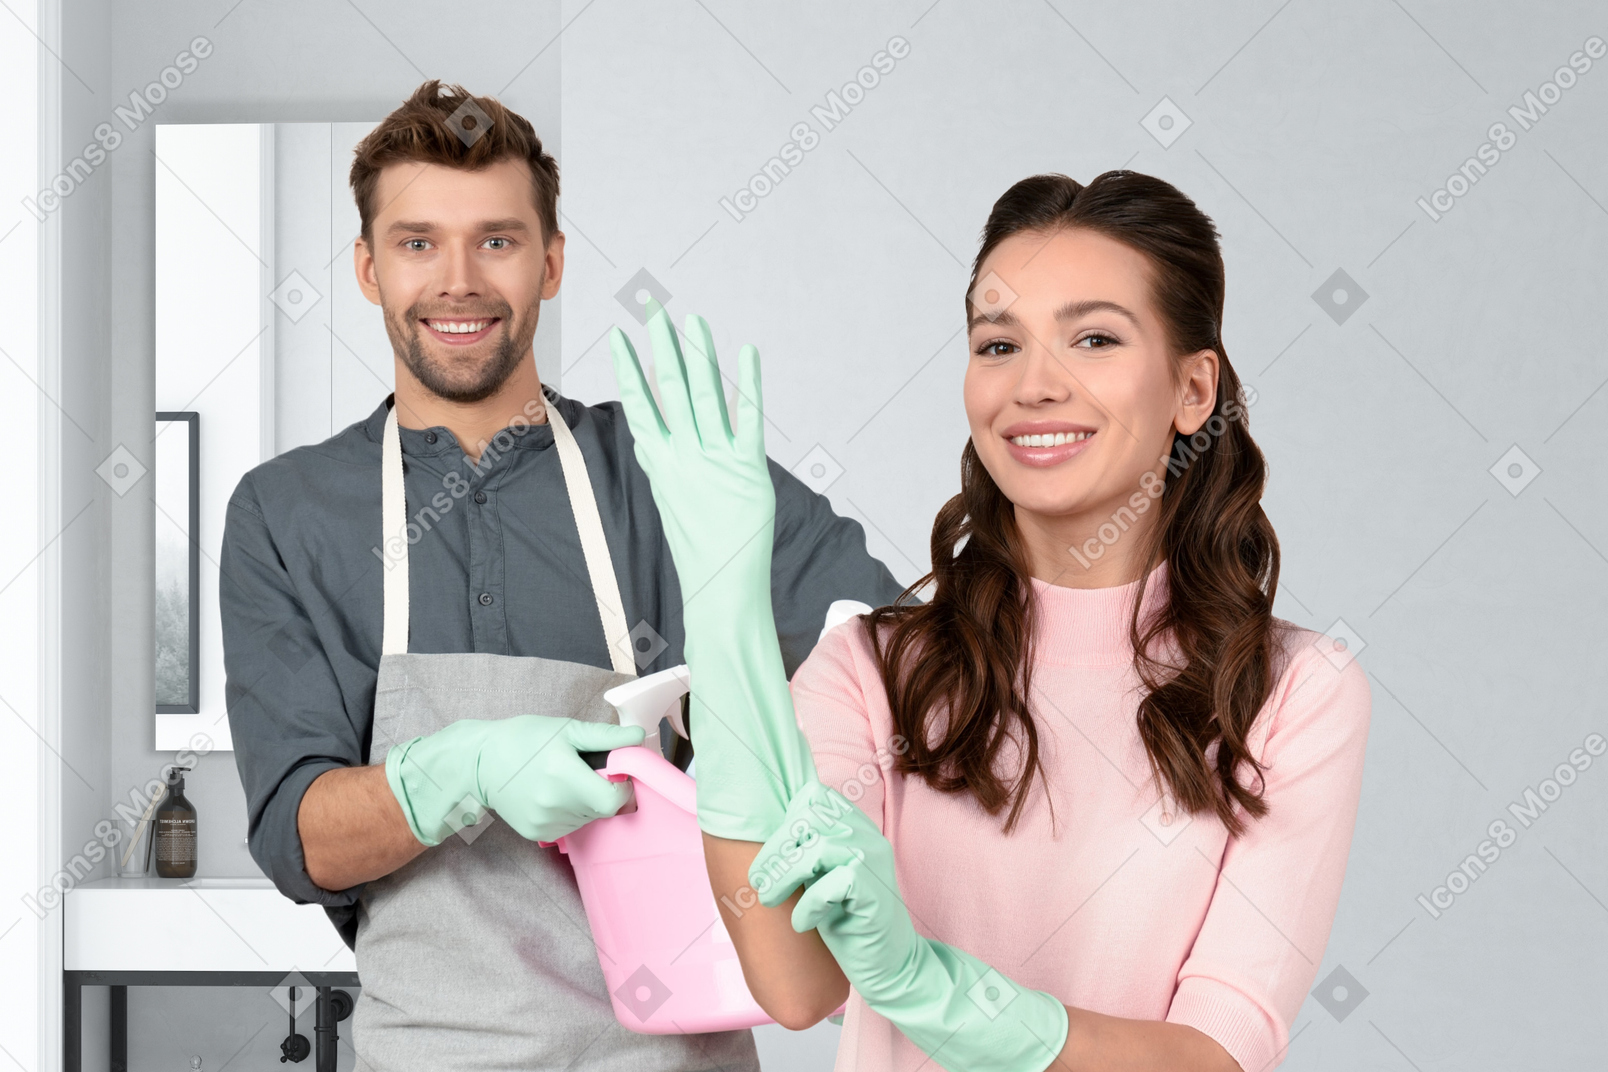 A man and a woman wearing cleaning gloves in a bathroom